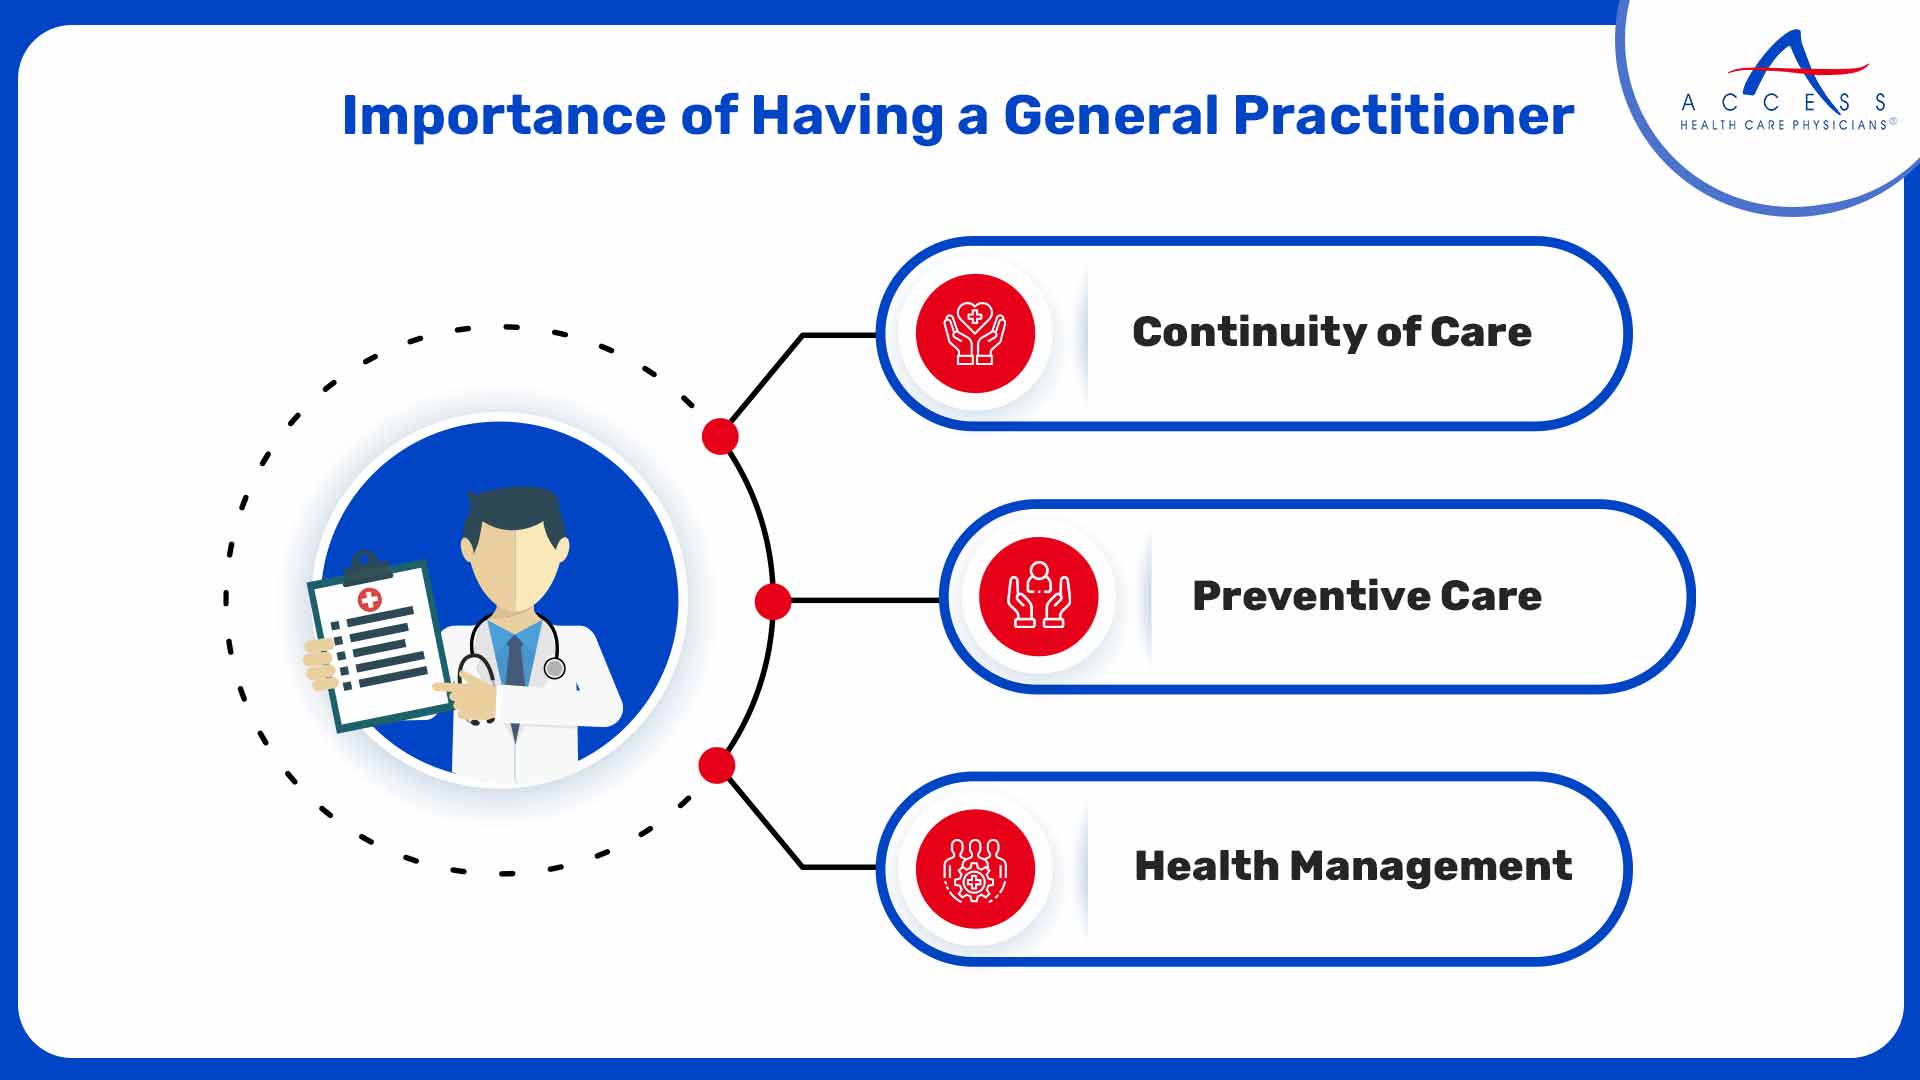 Importance of Having a General Practitioner